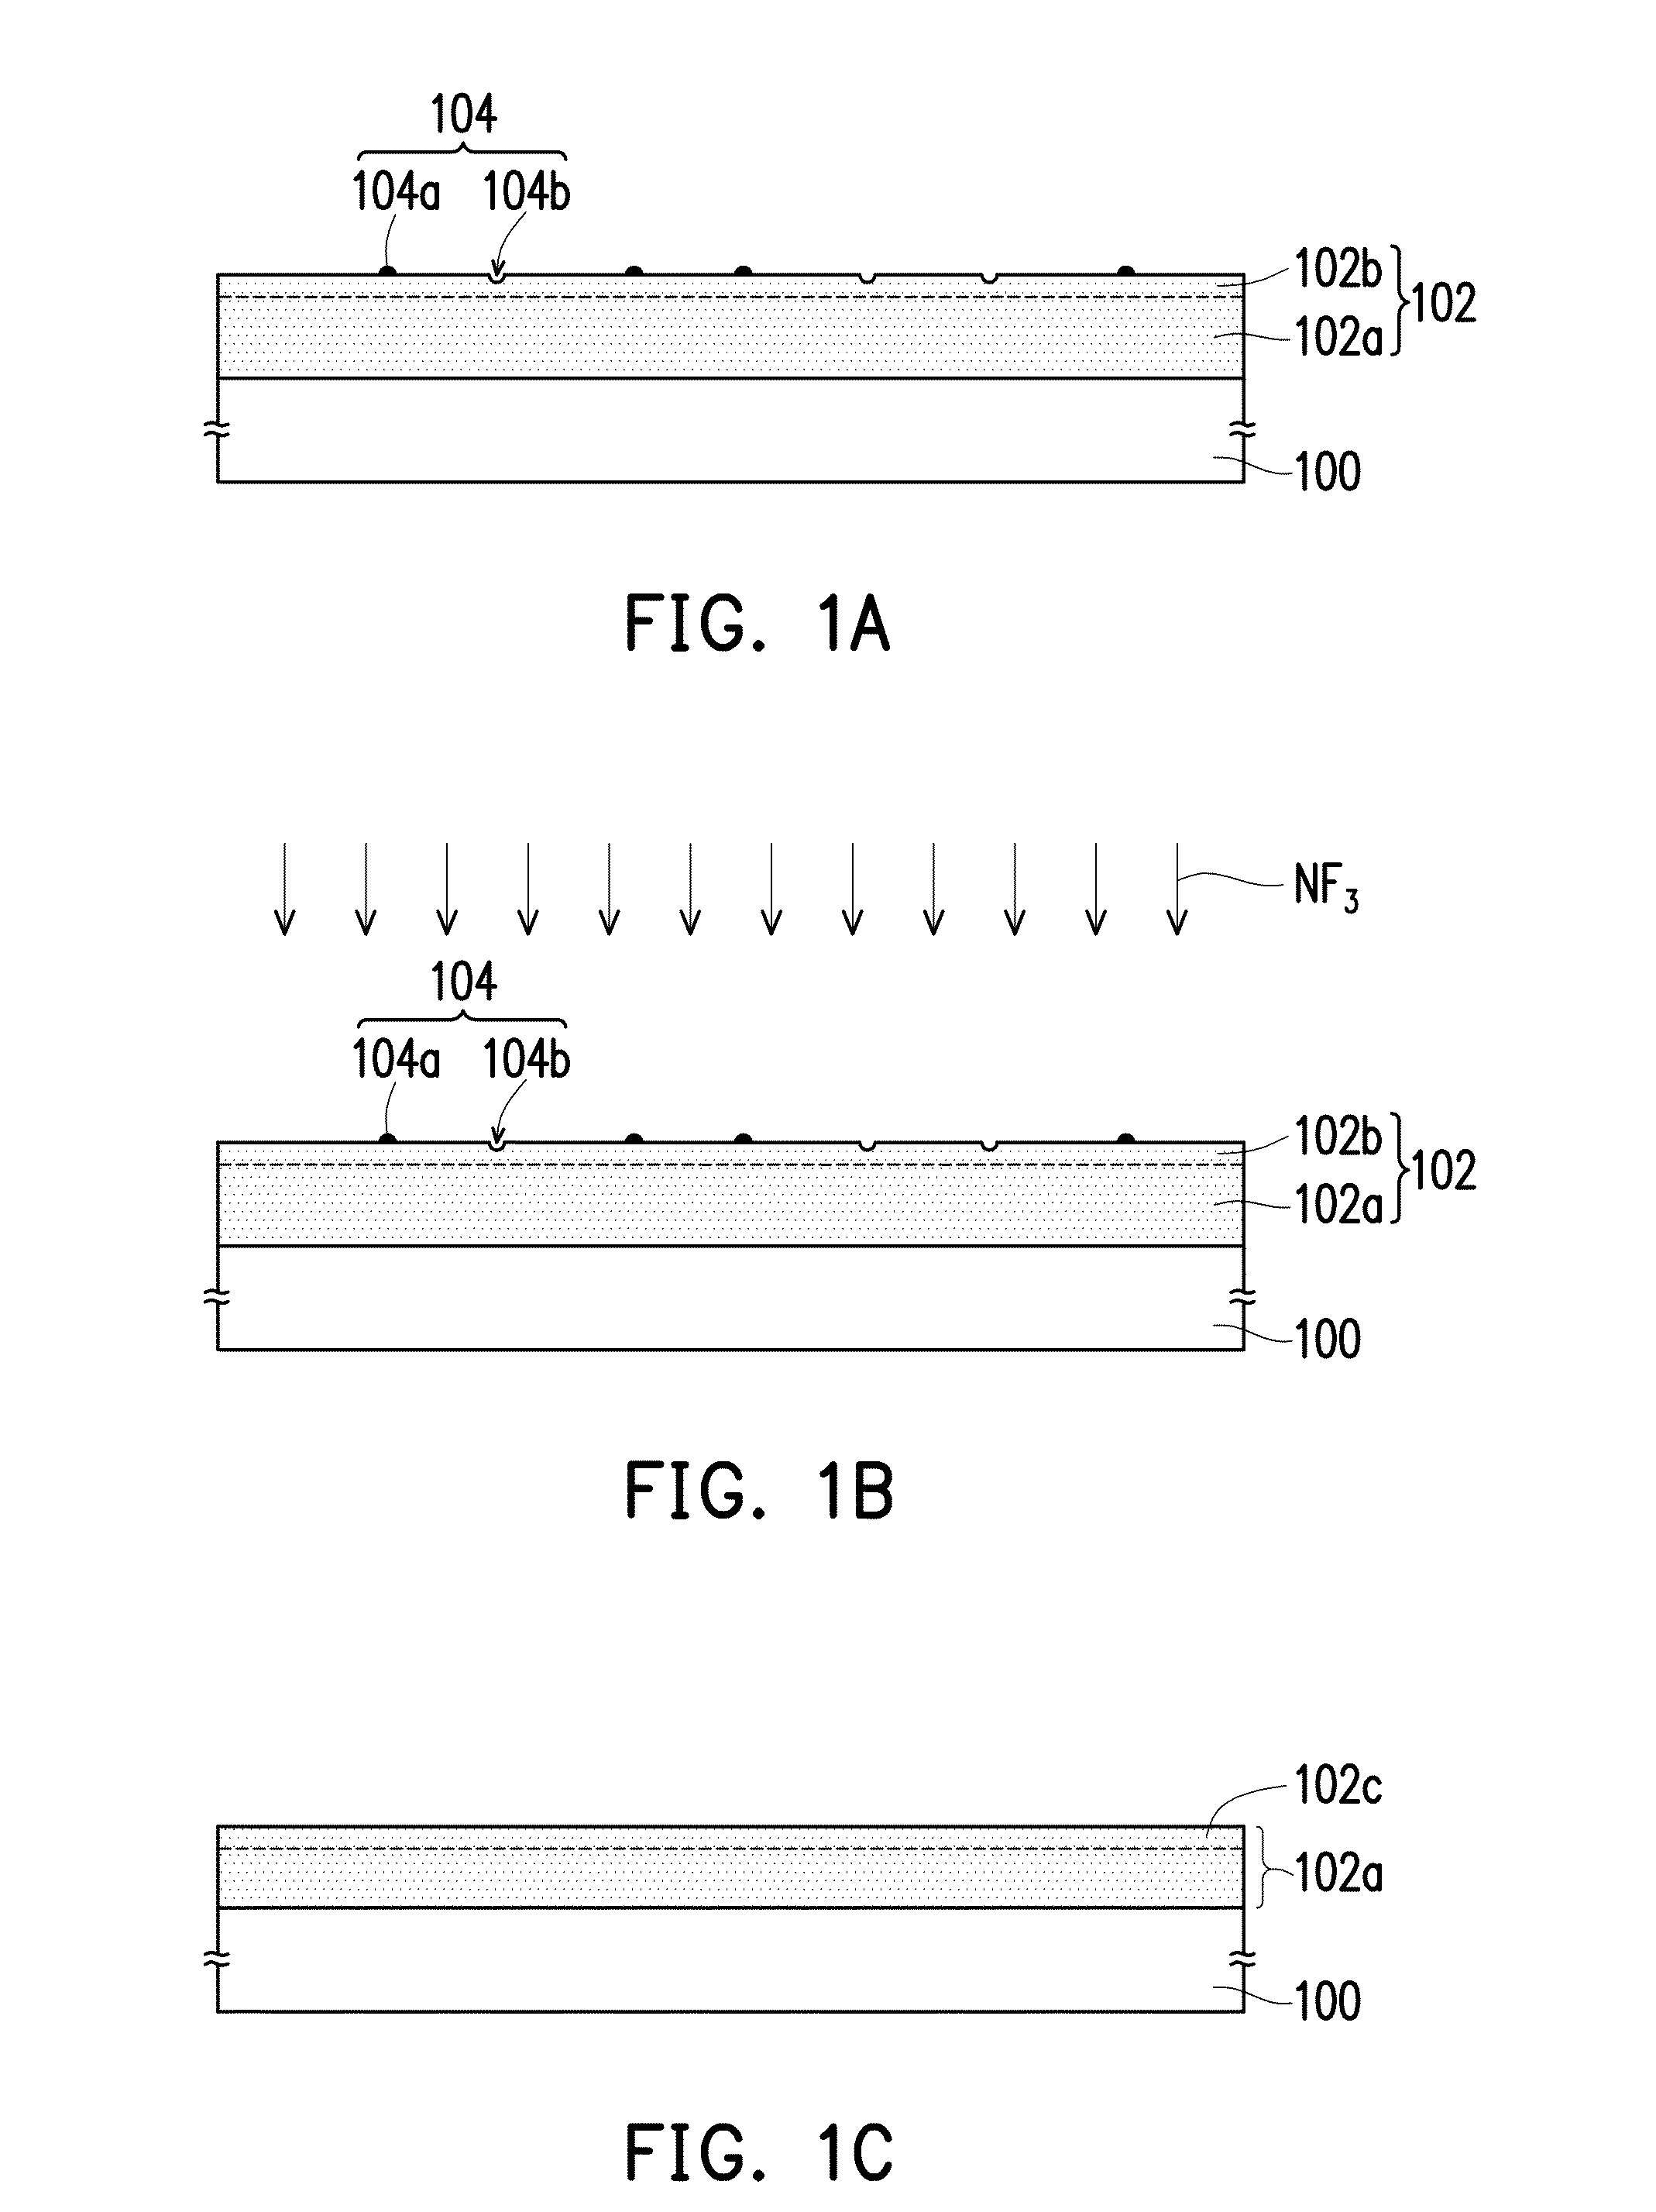 A semiconductor device comprising a surface portion implanted with nitrogen and fluorine